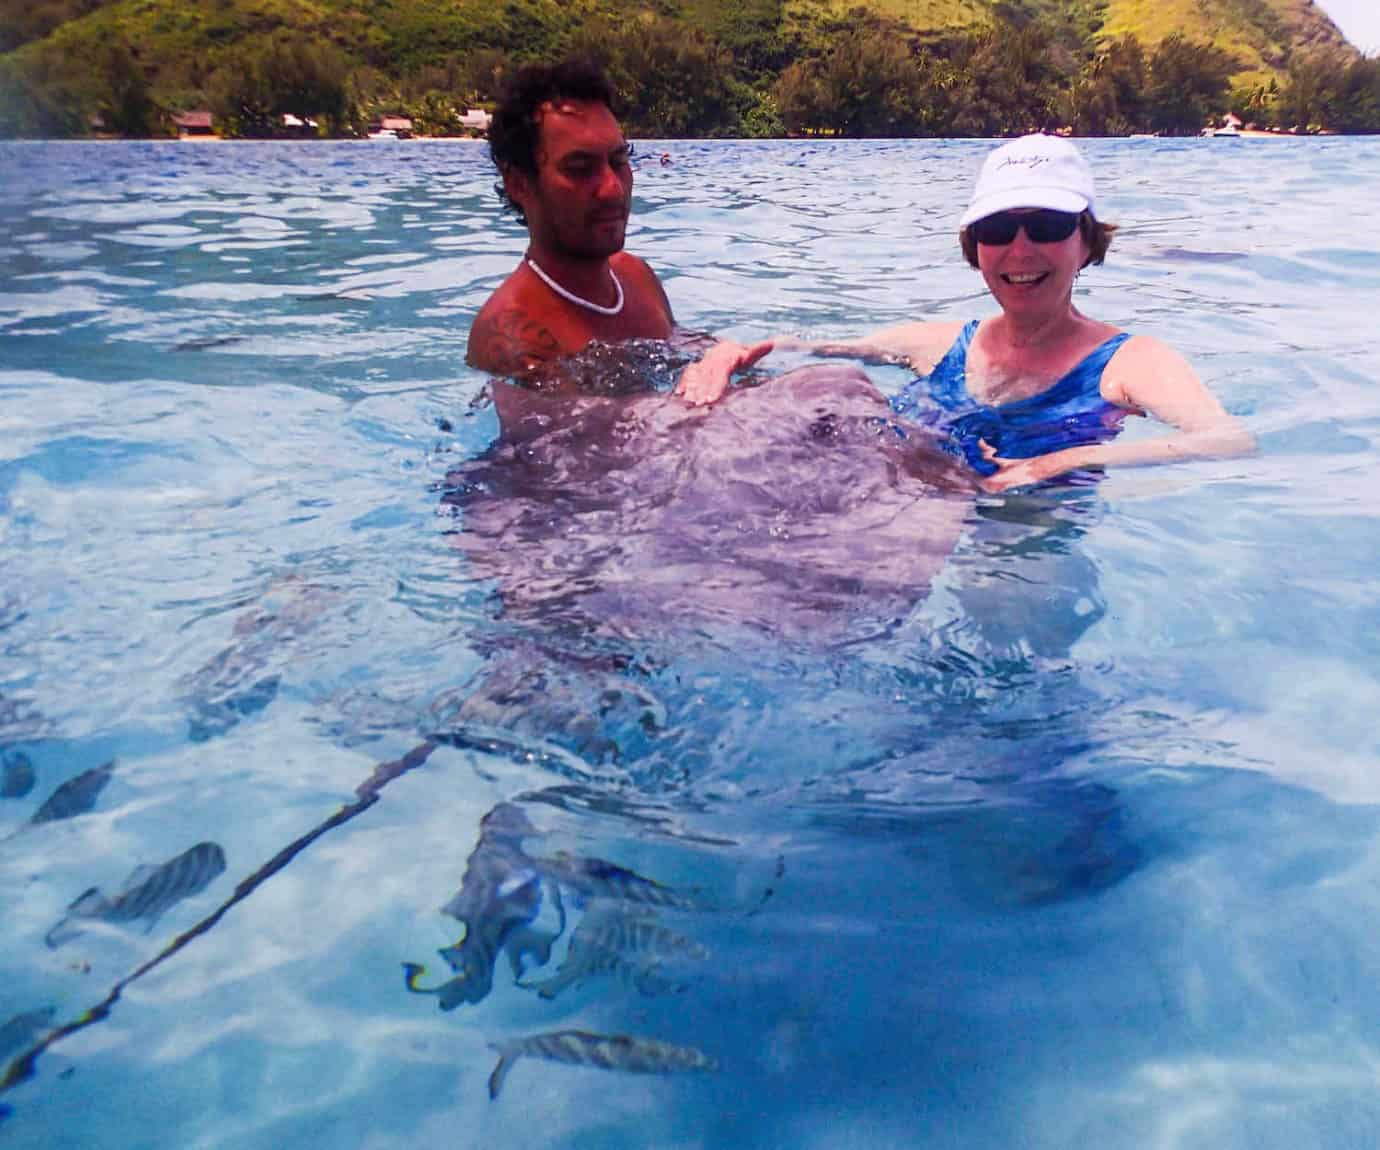 woman and man in water touching a stingray